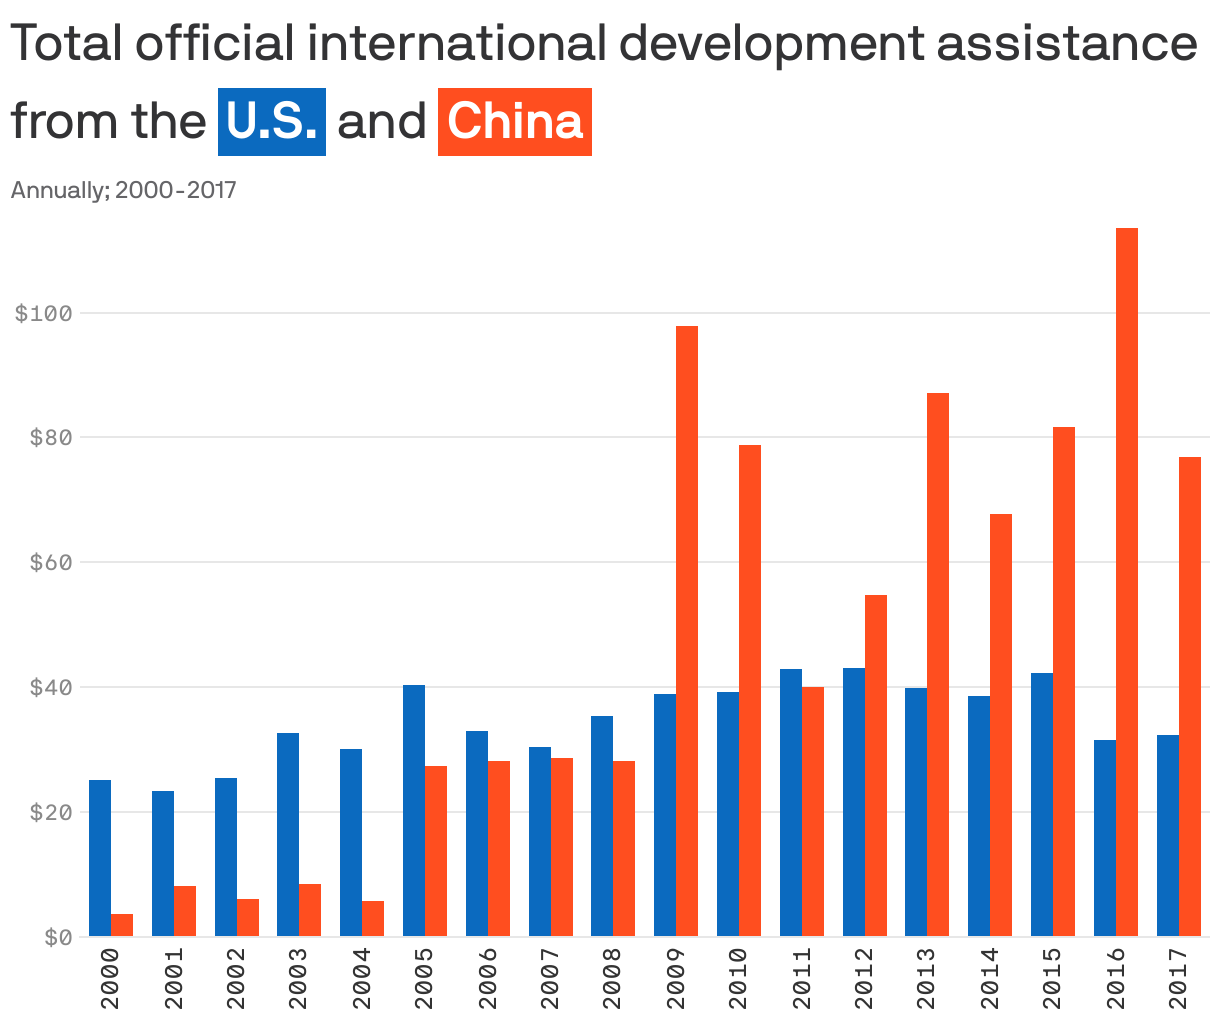 Total official international development assistance from the <span style="color: white; background-color:#0b6abf; padding: 0px 4px; display: inline-block; margin: 5px 0px 0px; white-space: nowrap; font-weight: 900;">U.S.</span> and <span style="color: white; background-color:#ff4e1f; padding: 0px 4px; display: inline-block; margin: 5px 0px 0px; white-space: nowrap; font-weight: 900;">China</span>